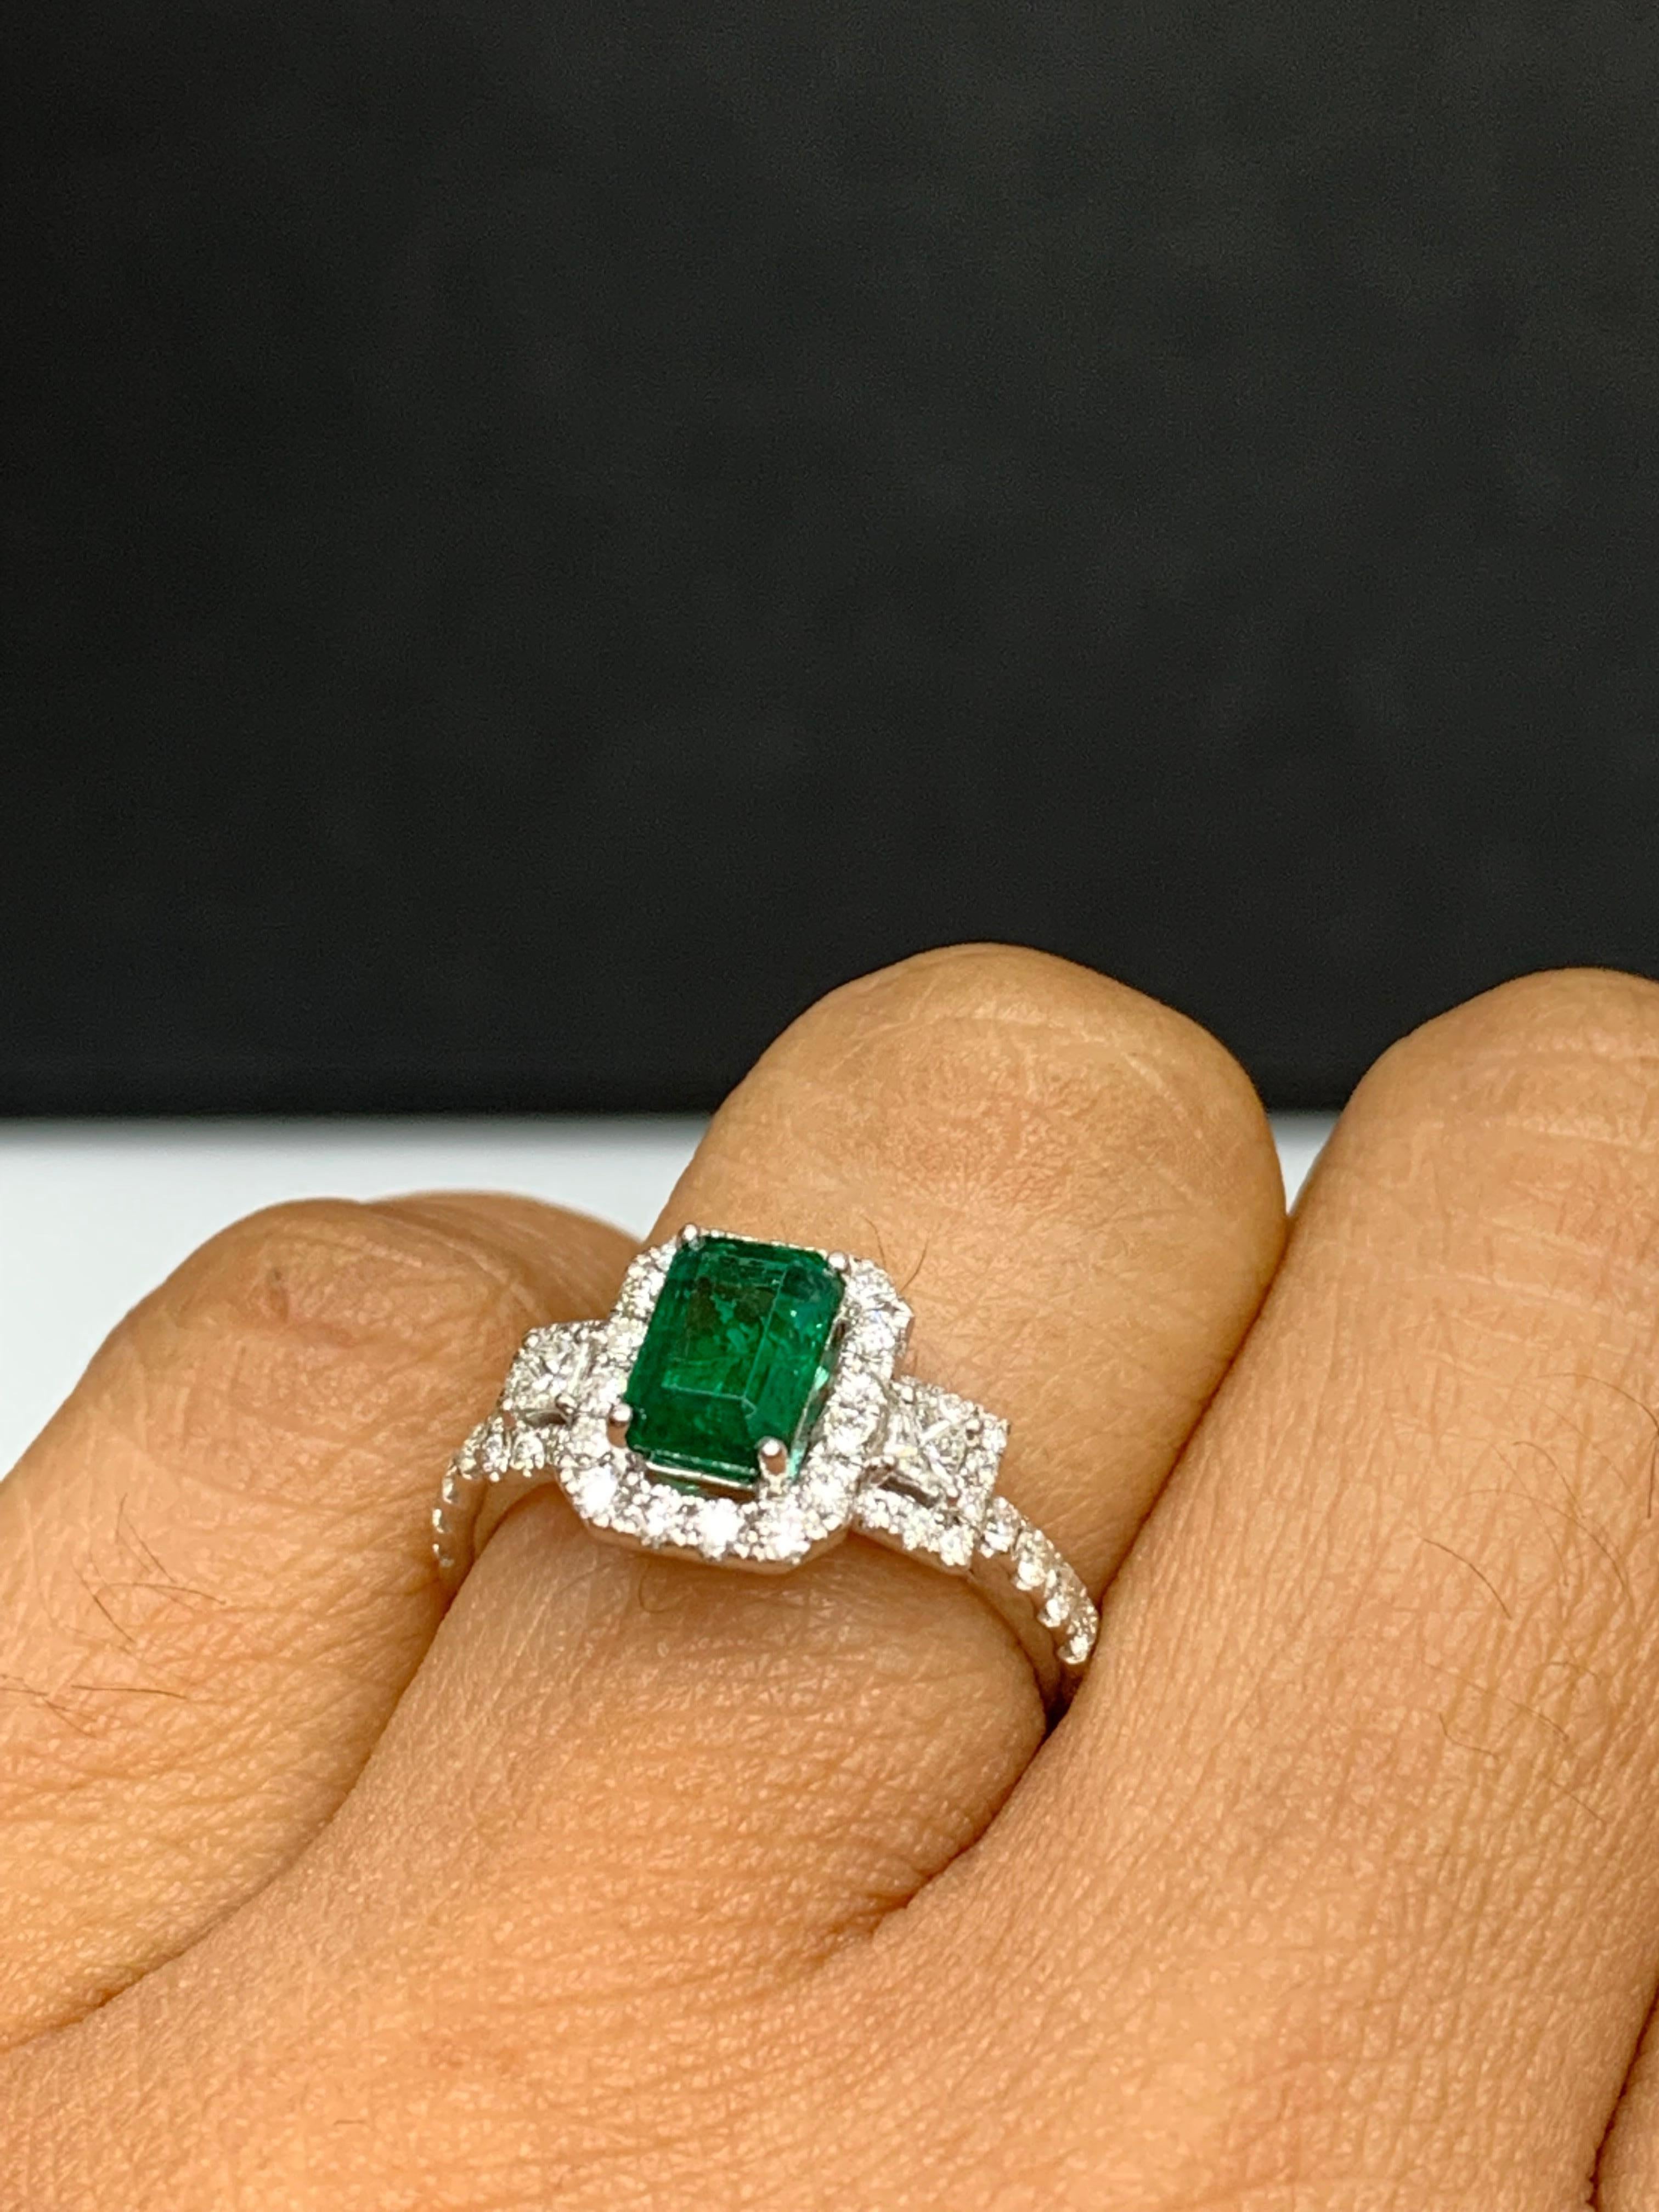 Modern 1.10 Carat Emerald Cut Emerald and Diamond Ring in 18k White Gold For Sale